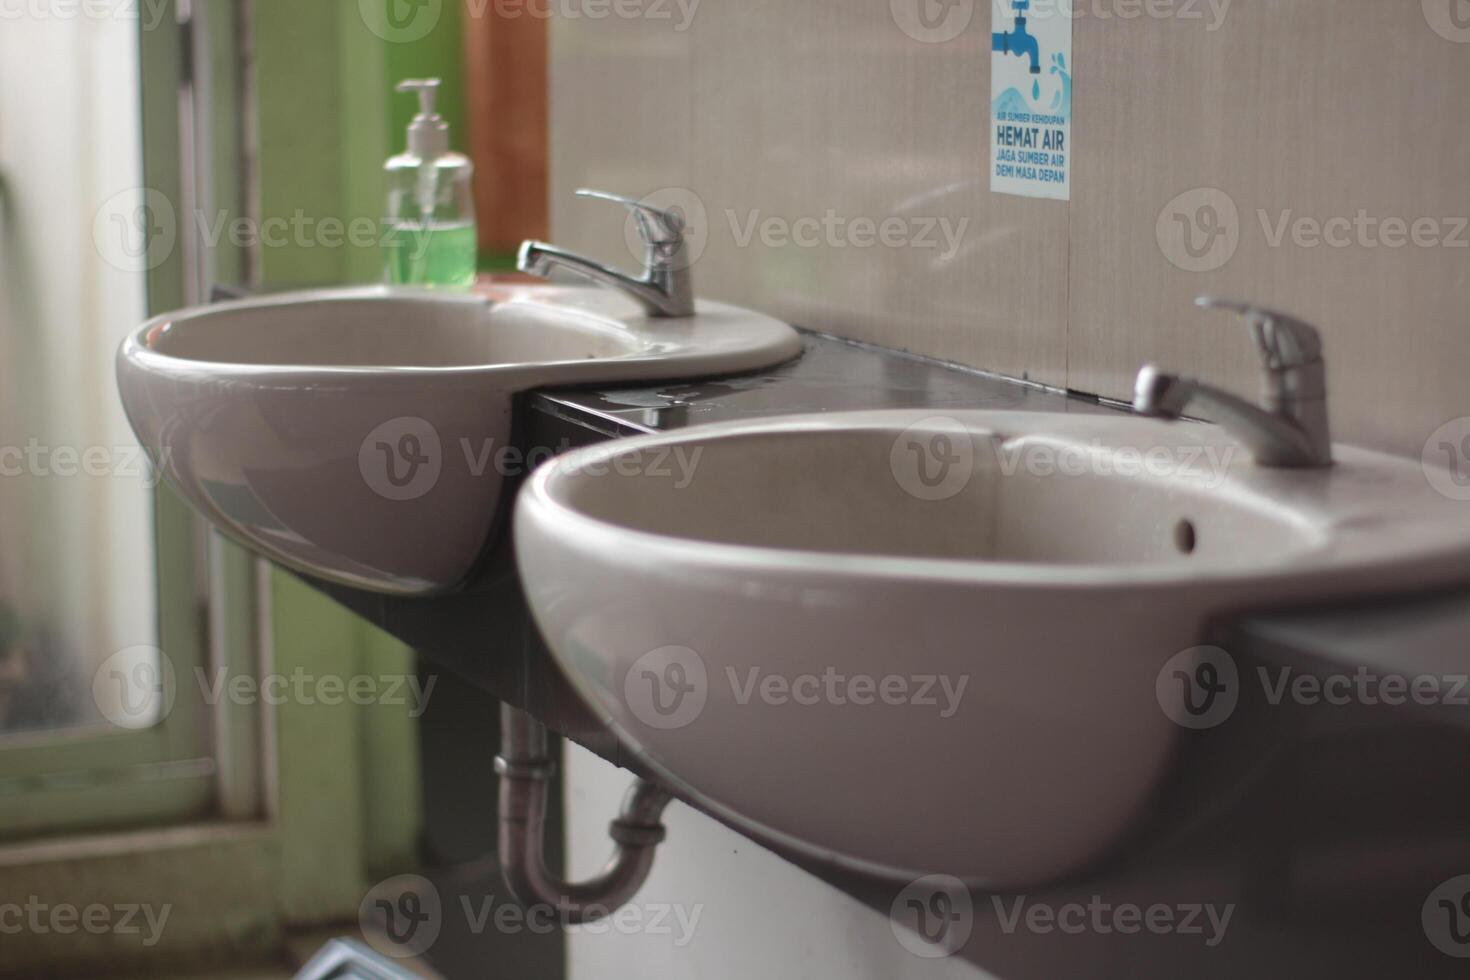 Two washbasin to asia public toilet, Two modern ceramic washbasins, Ceramic sink with chrome mixer in contemporary washroom. photo